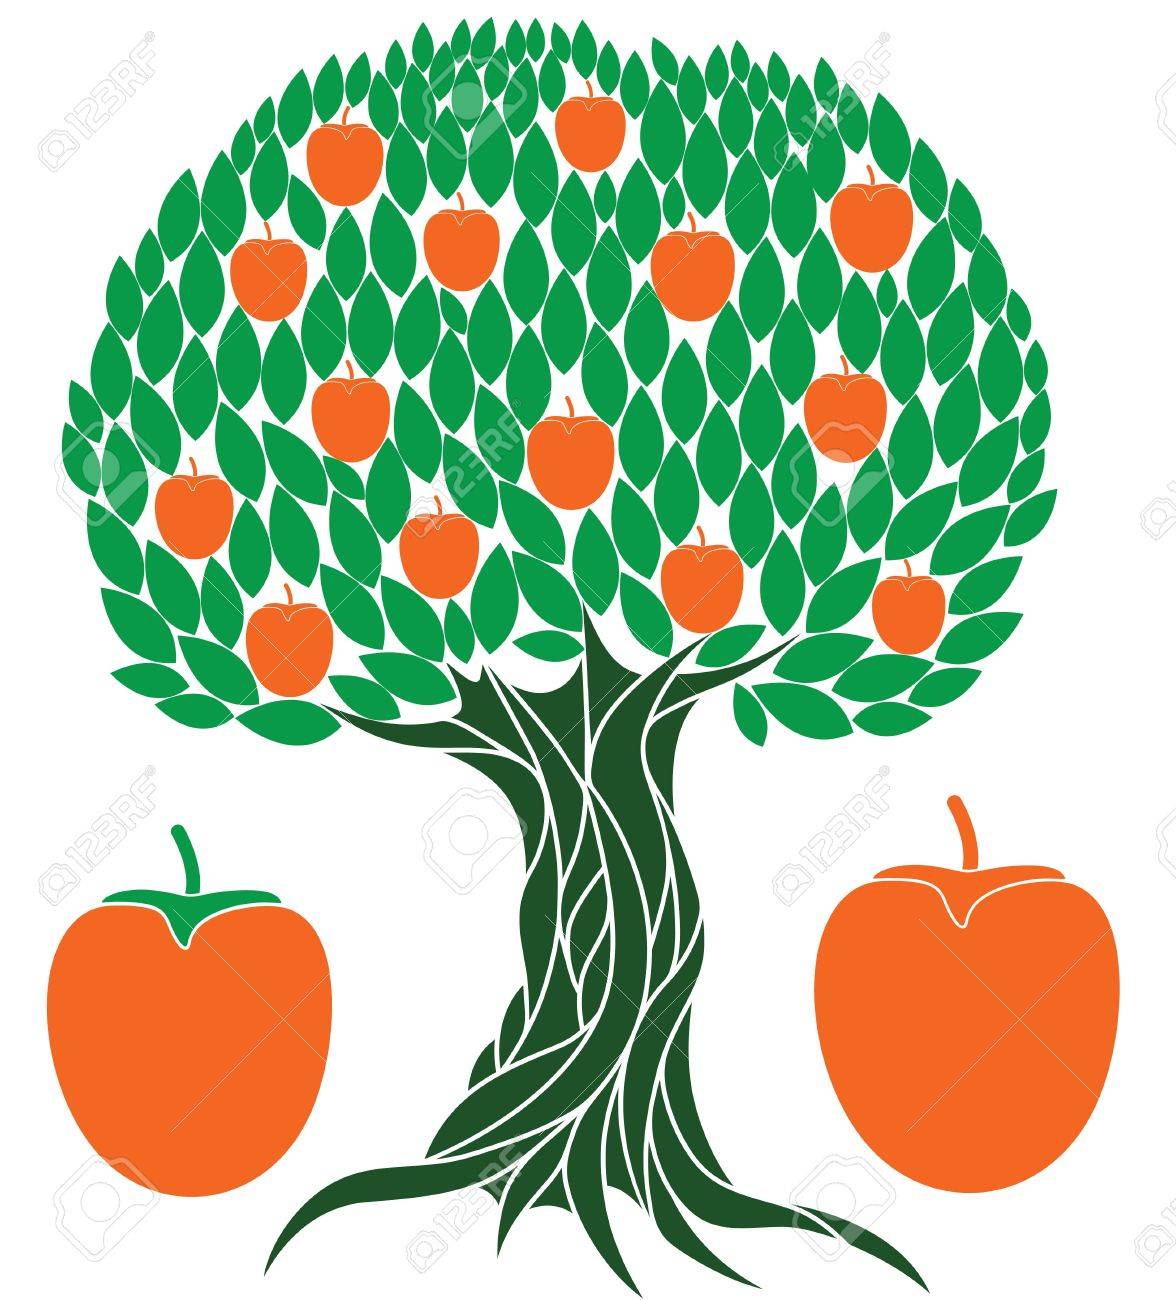 Clipart - Persimmon fruits on